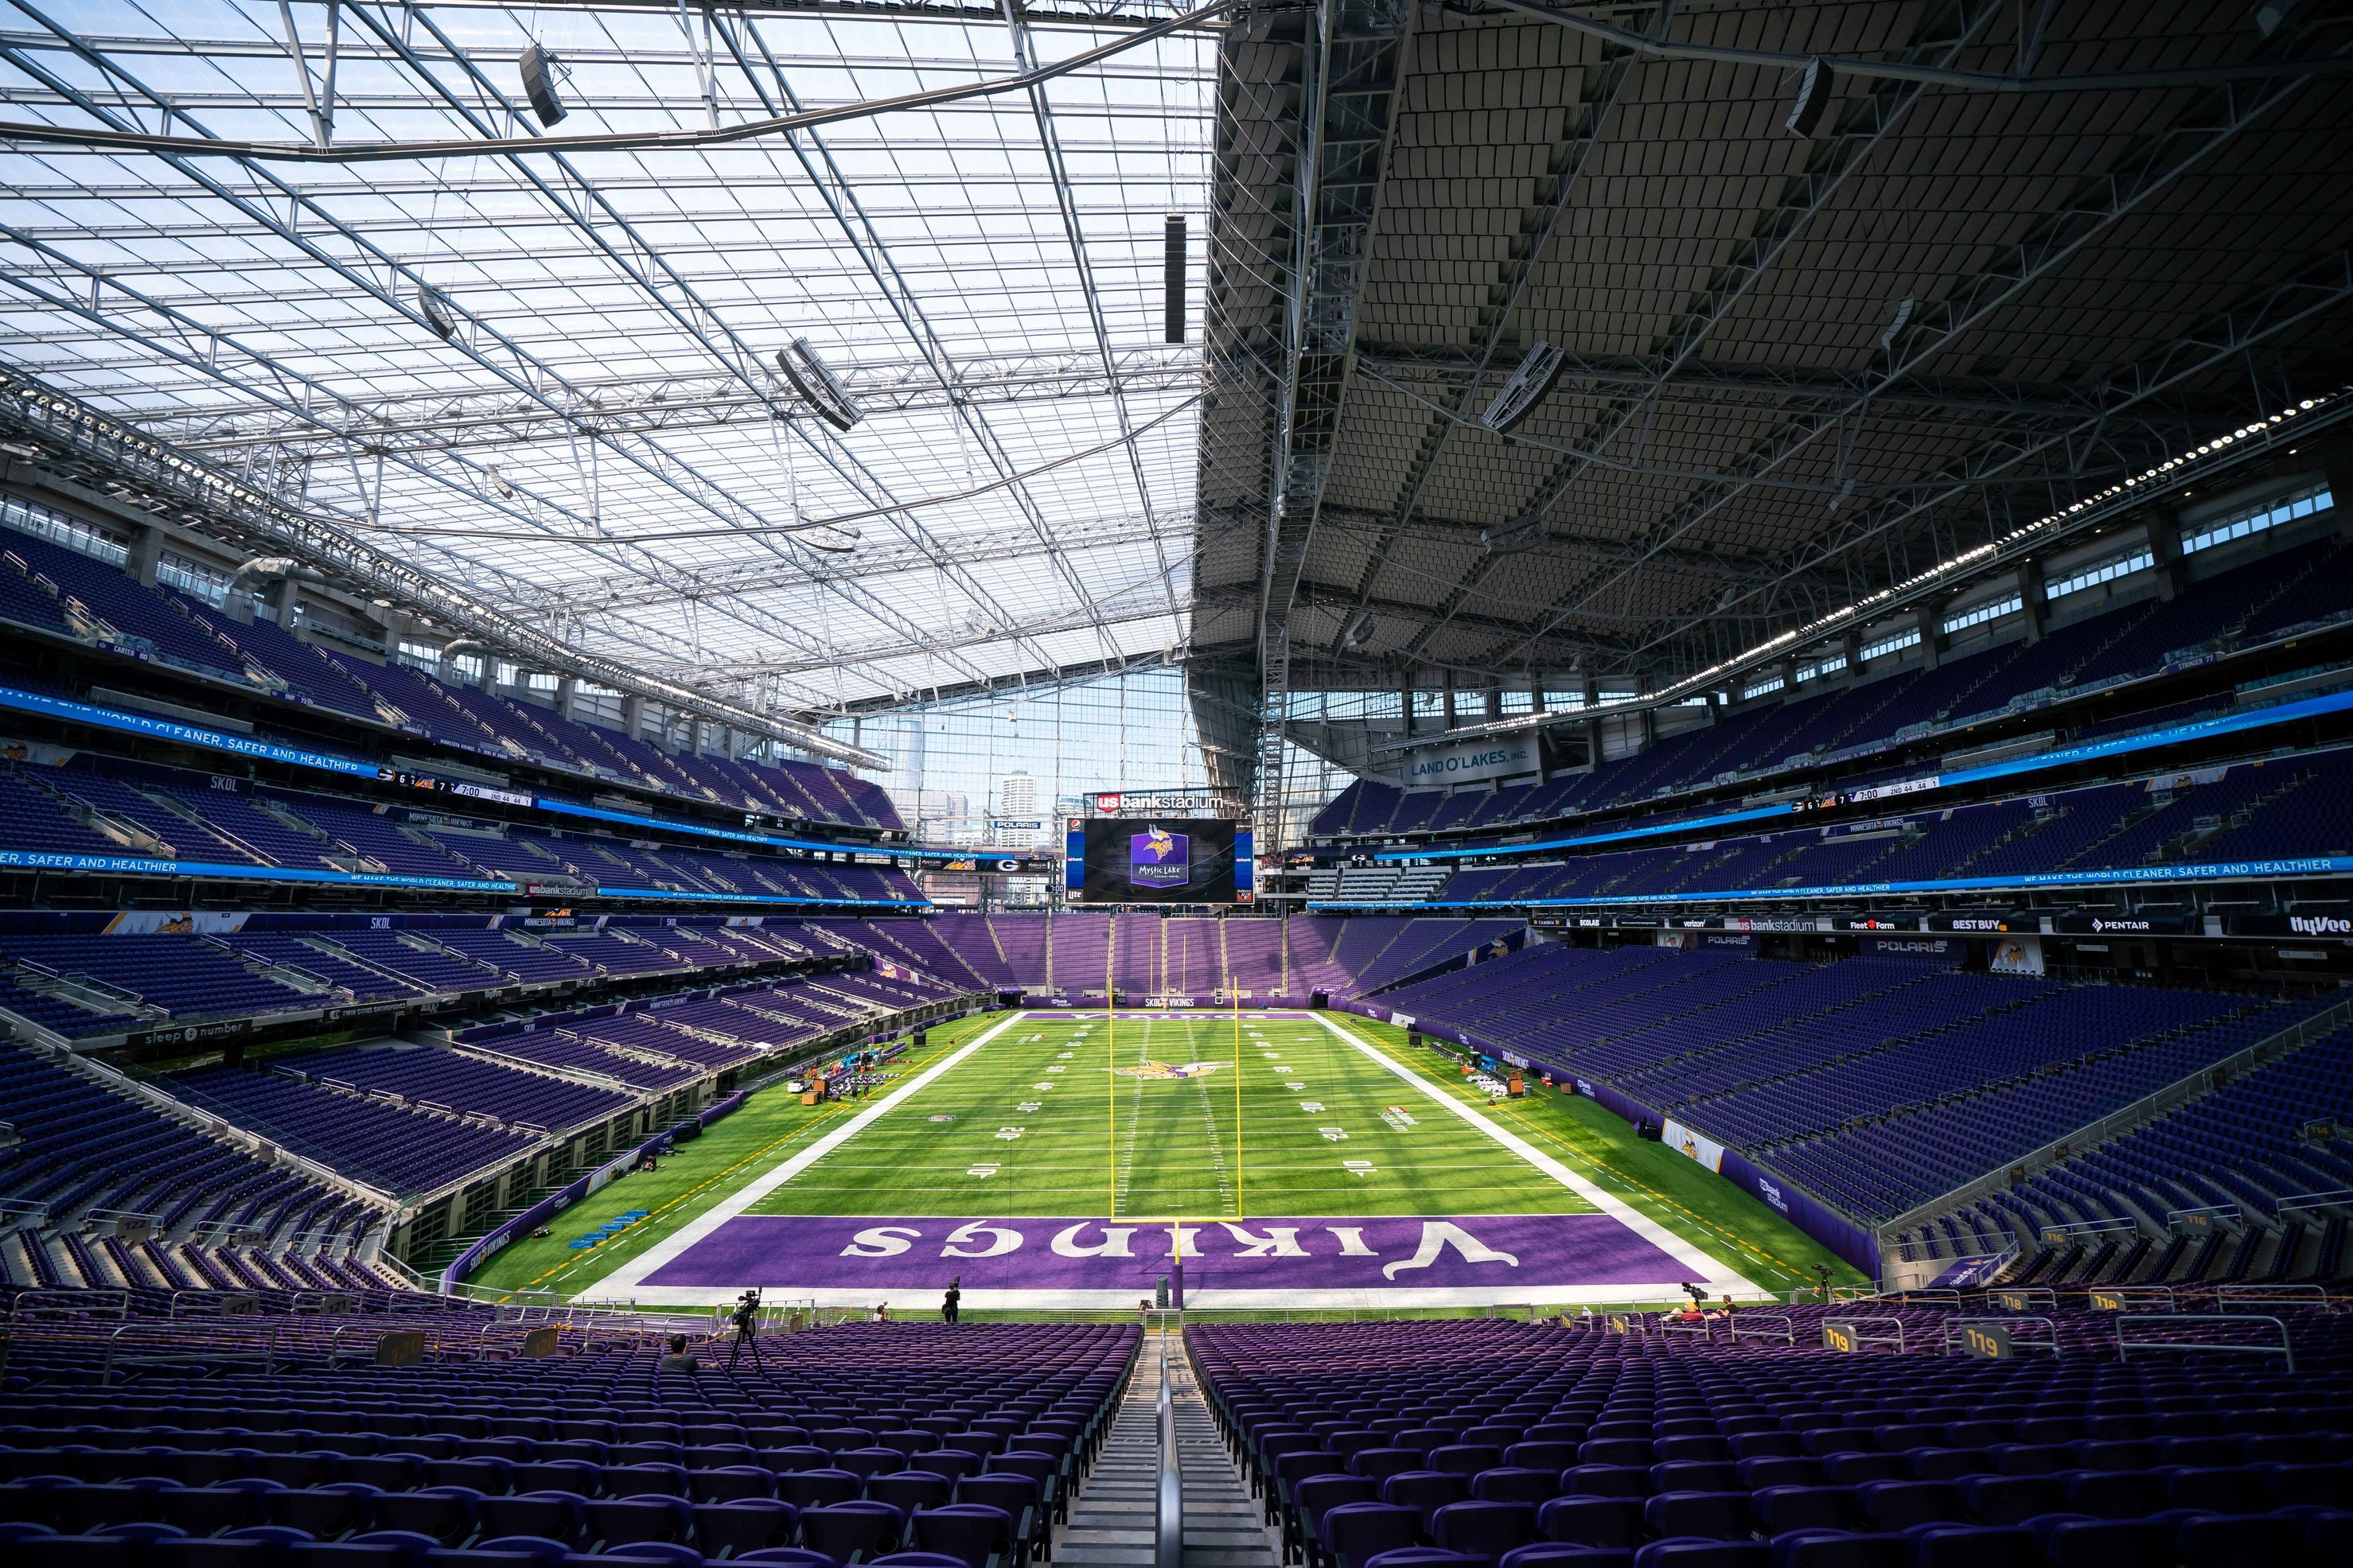 Vikings end scrimmage at U.S. Bank Stadium with statement for social